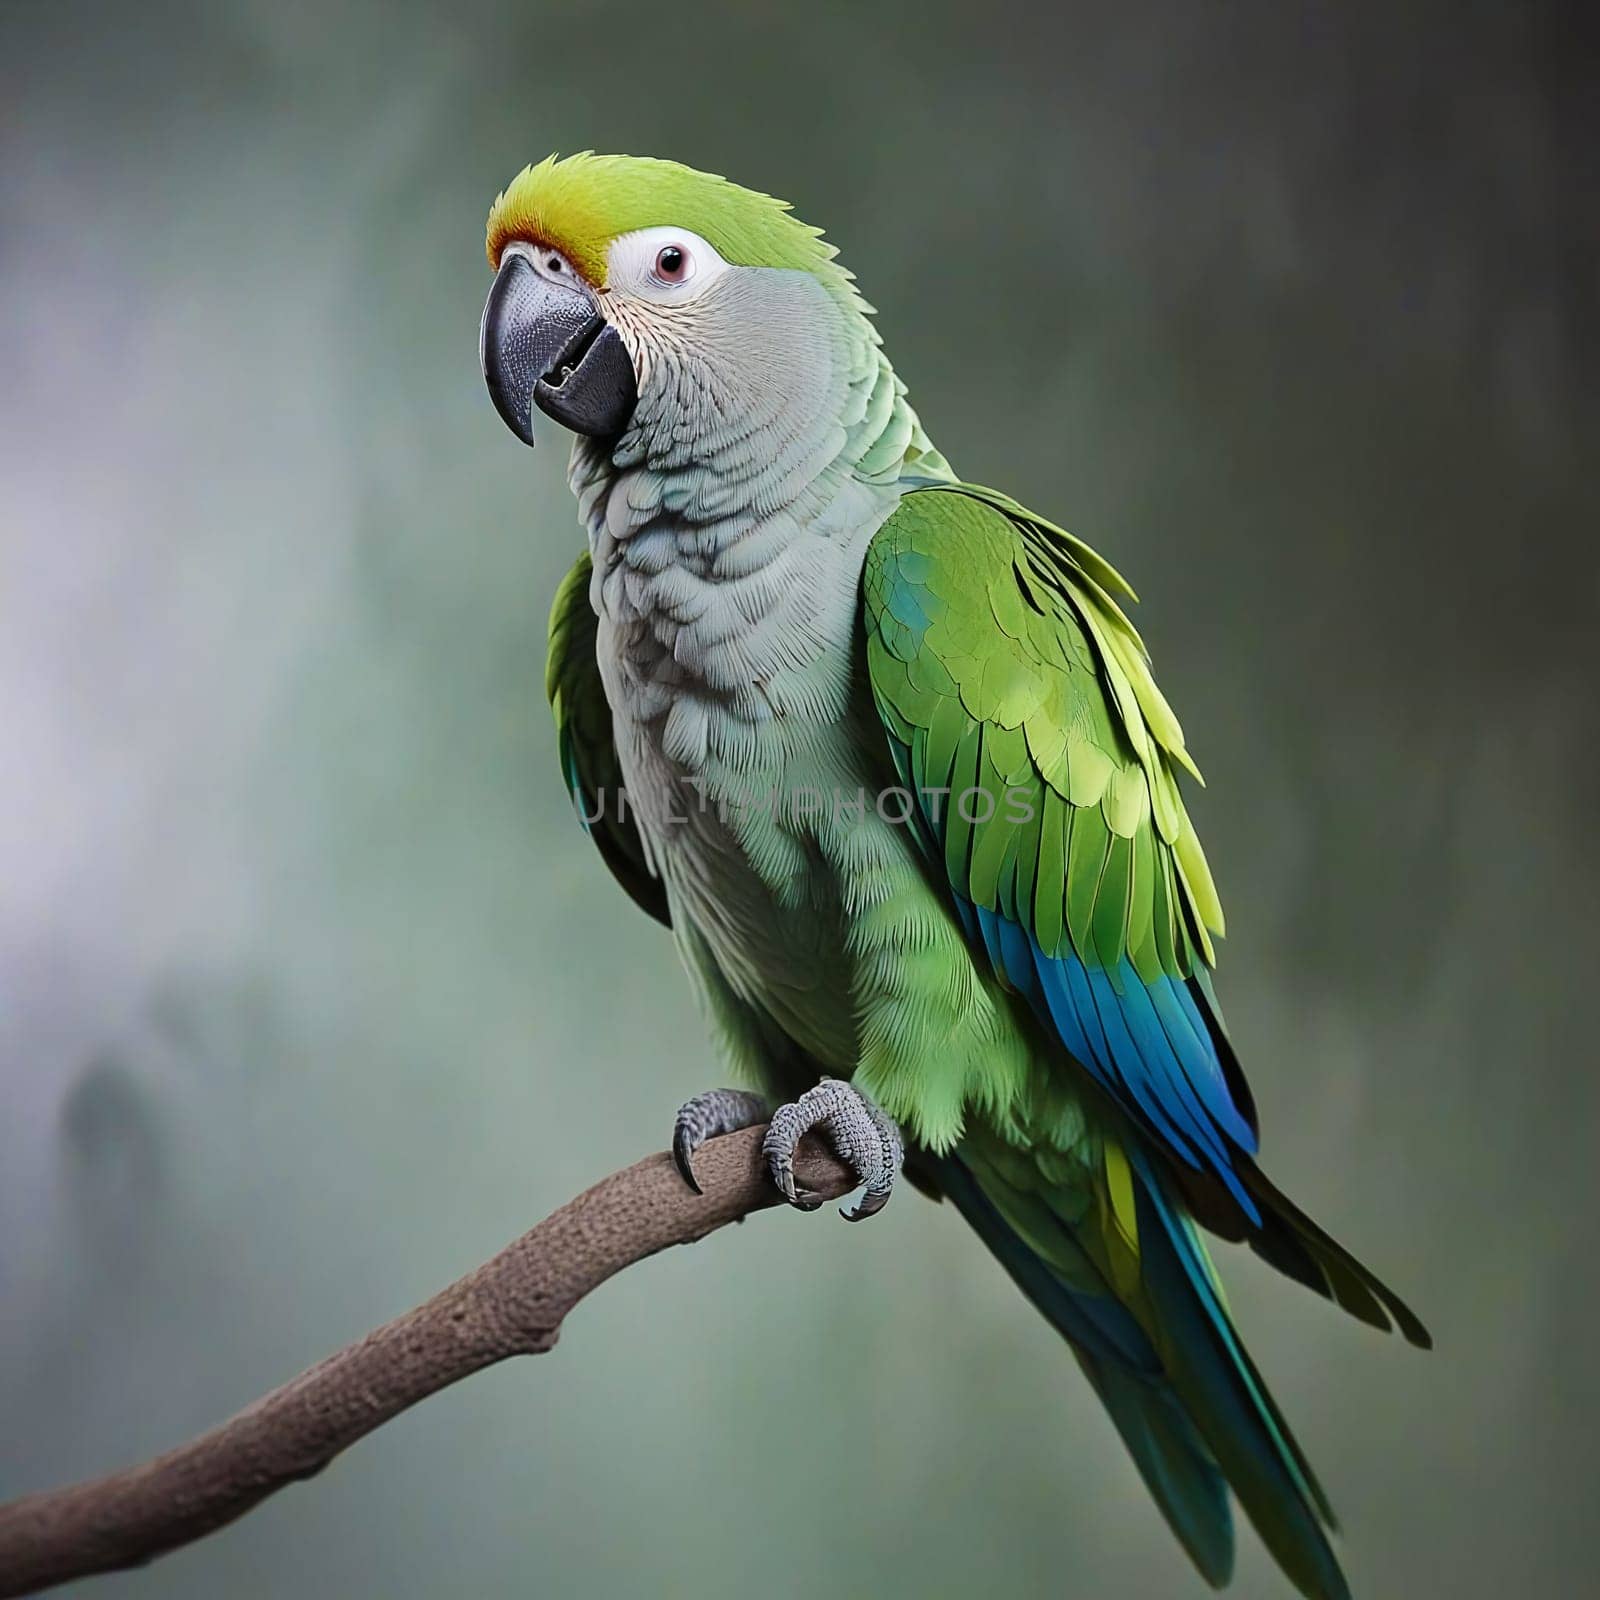 Green parrot on a gray background by VeronikaAngo